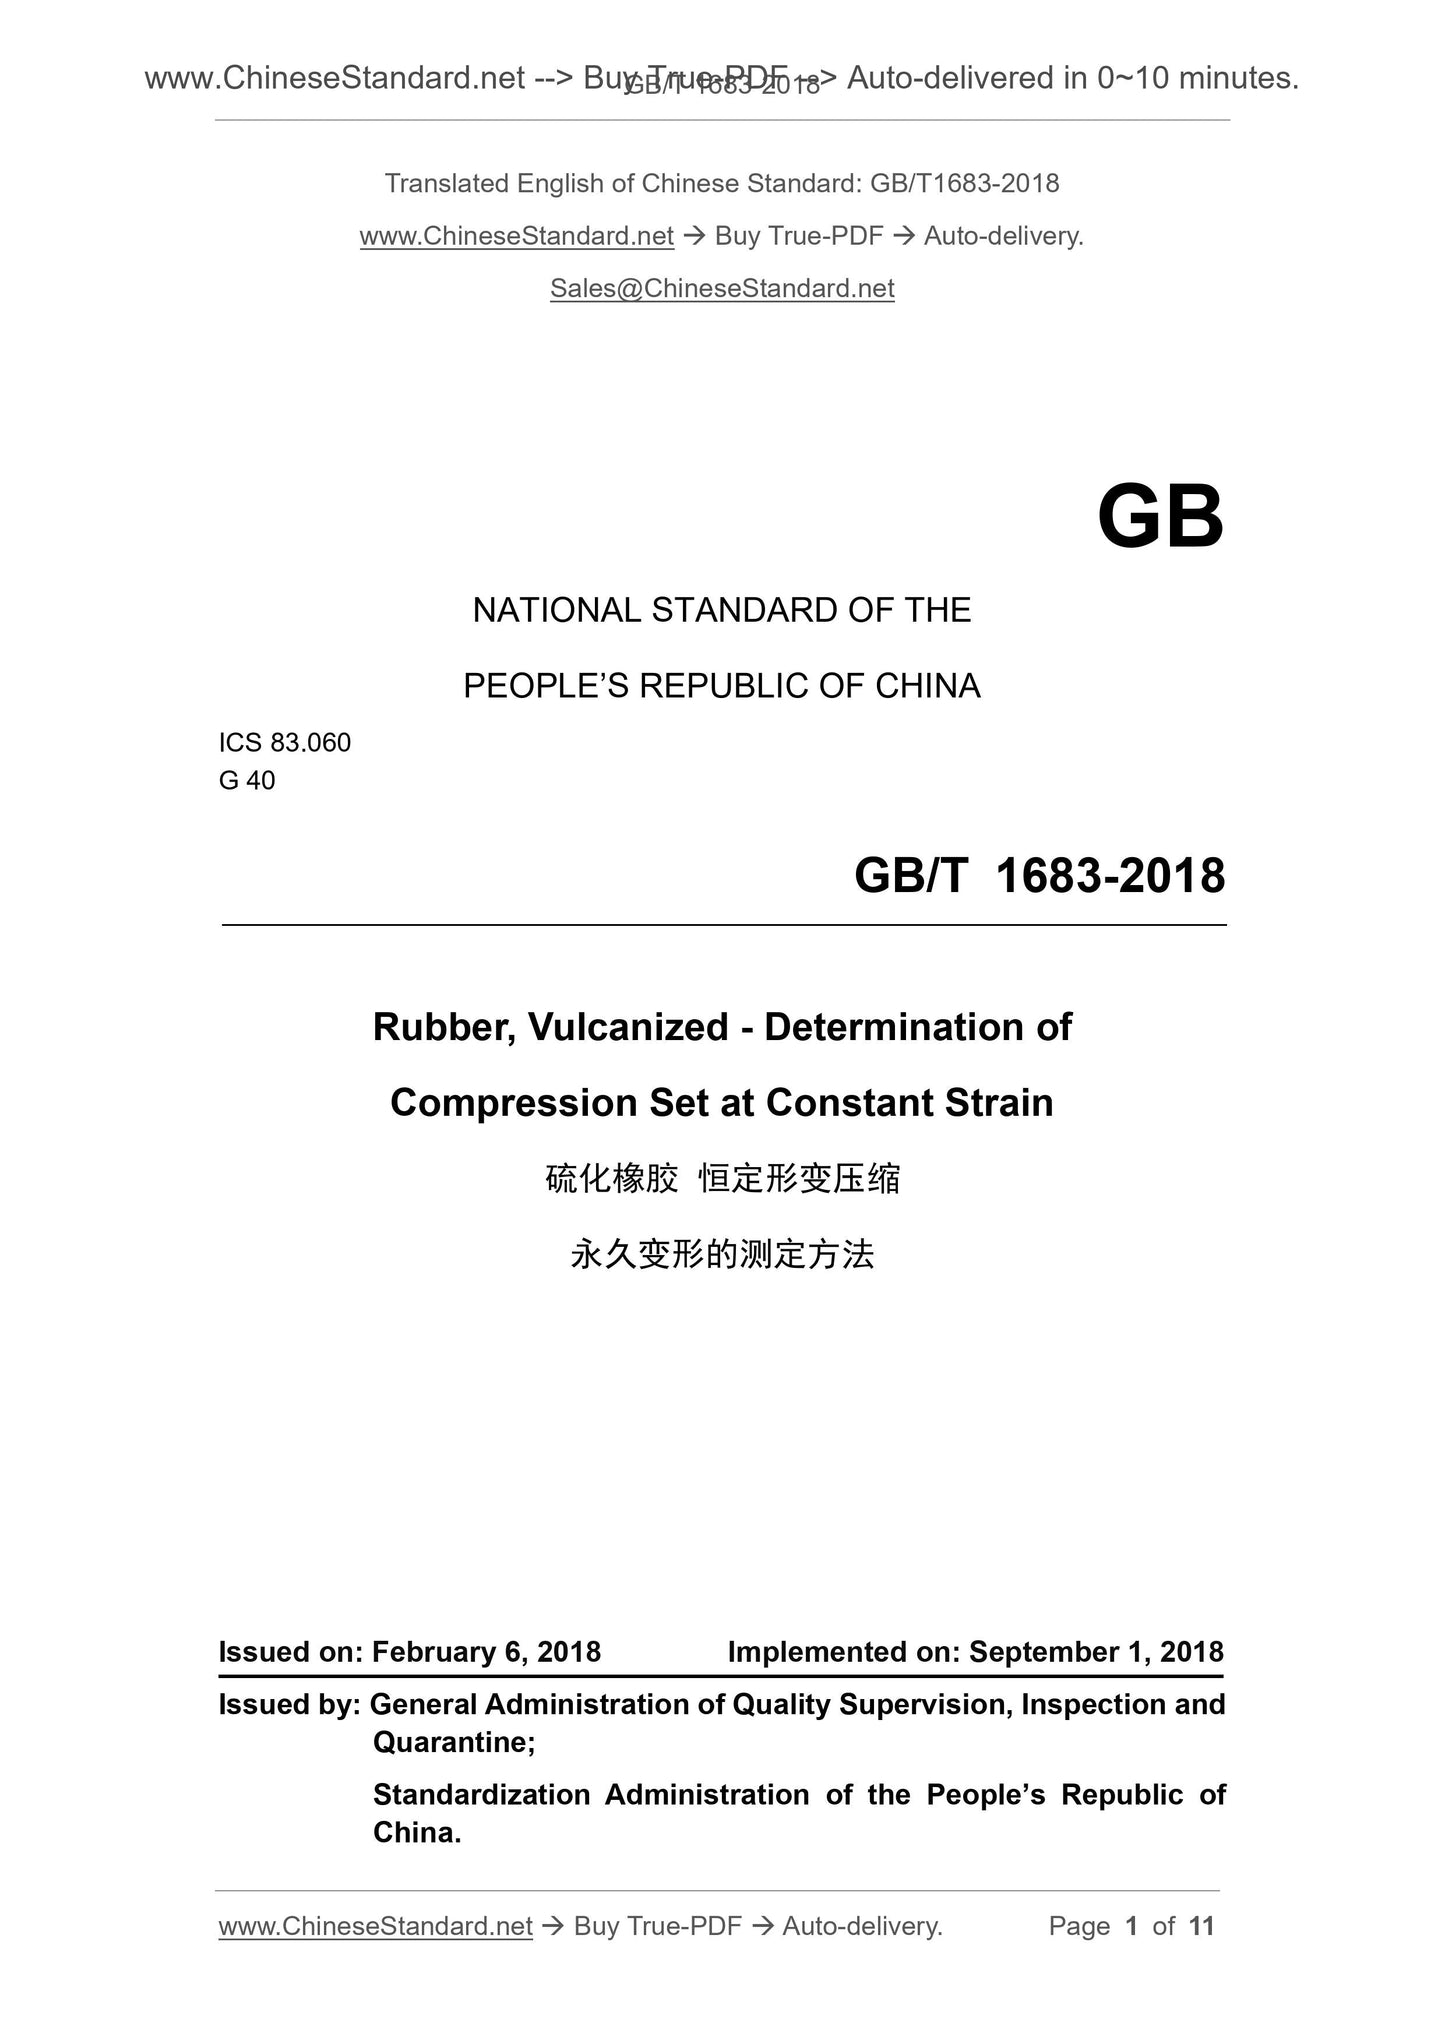 GB/T 1683-2018 Page 1